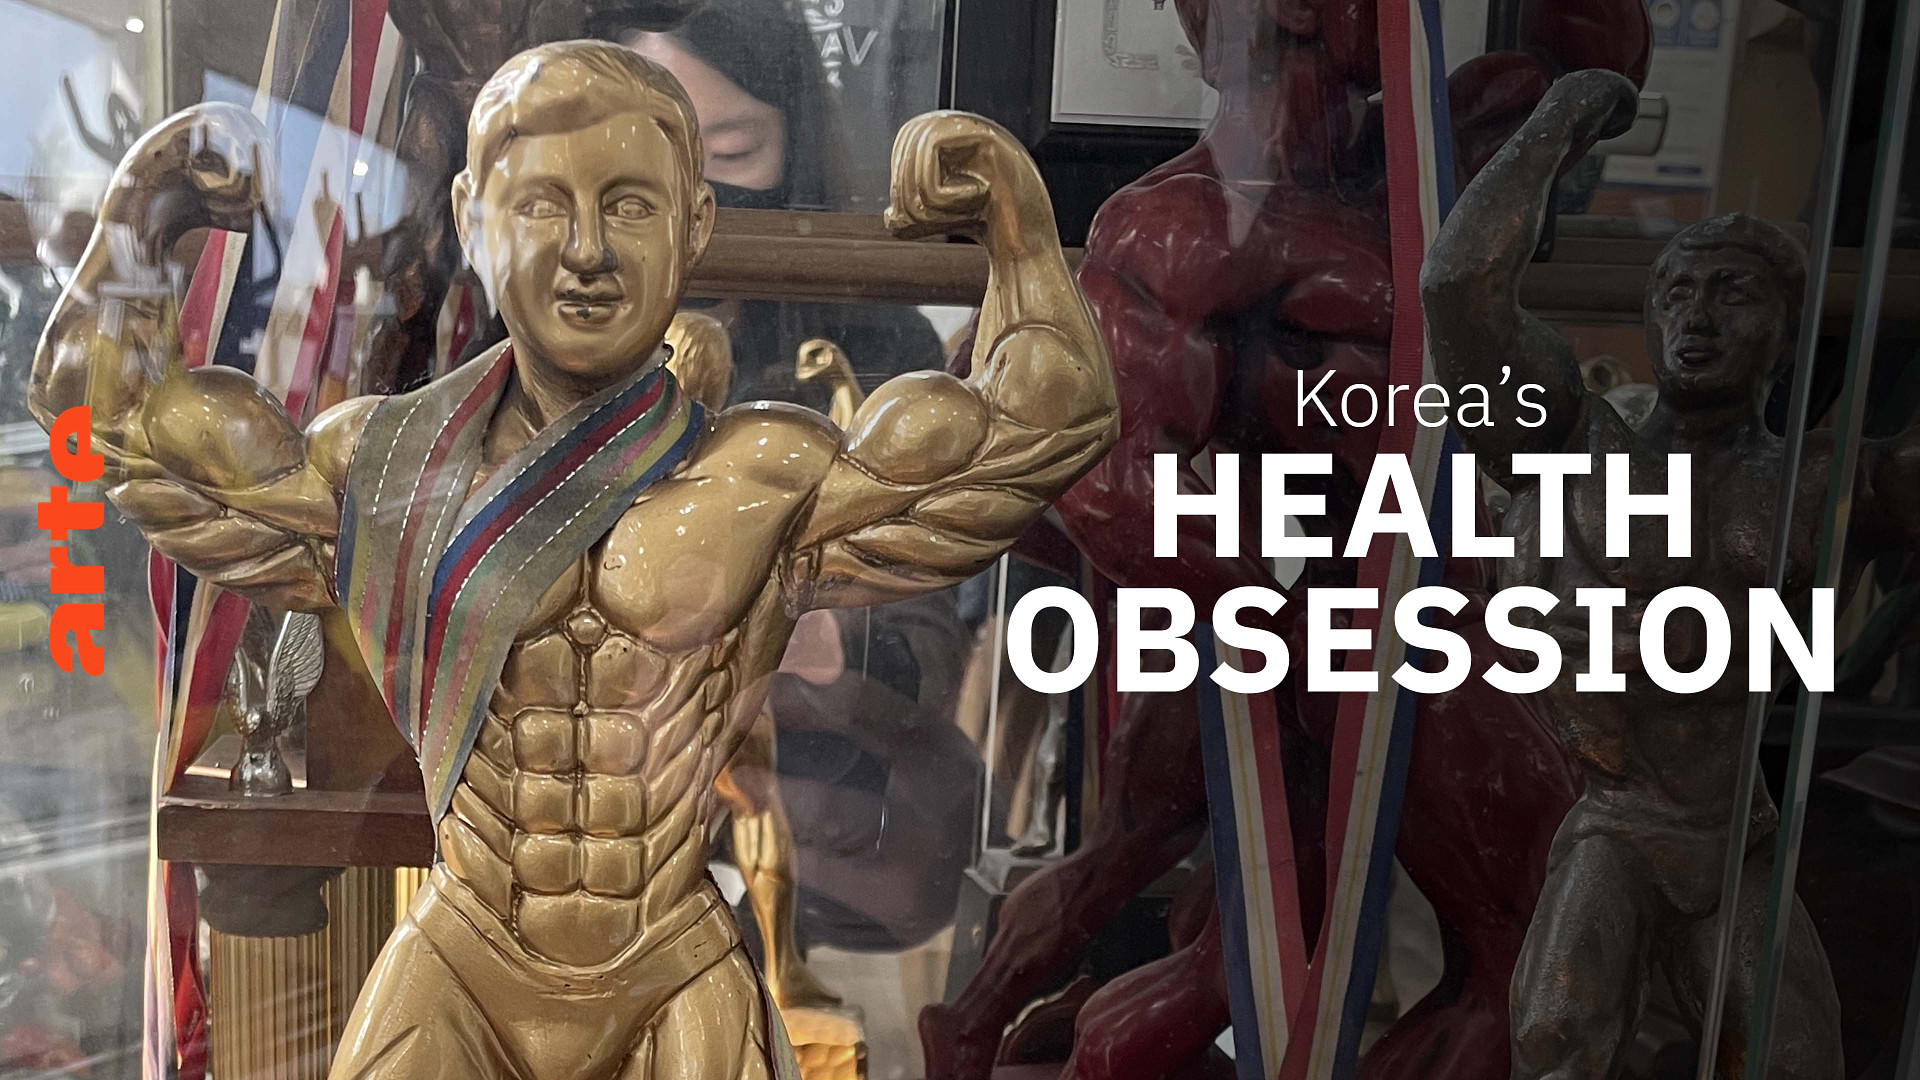 Porn Bodybuilder Rape - ARTE Reportage - South Korea: An Obsession With Health - Watch the full  documentary | ARTE in English